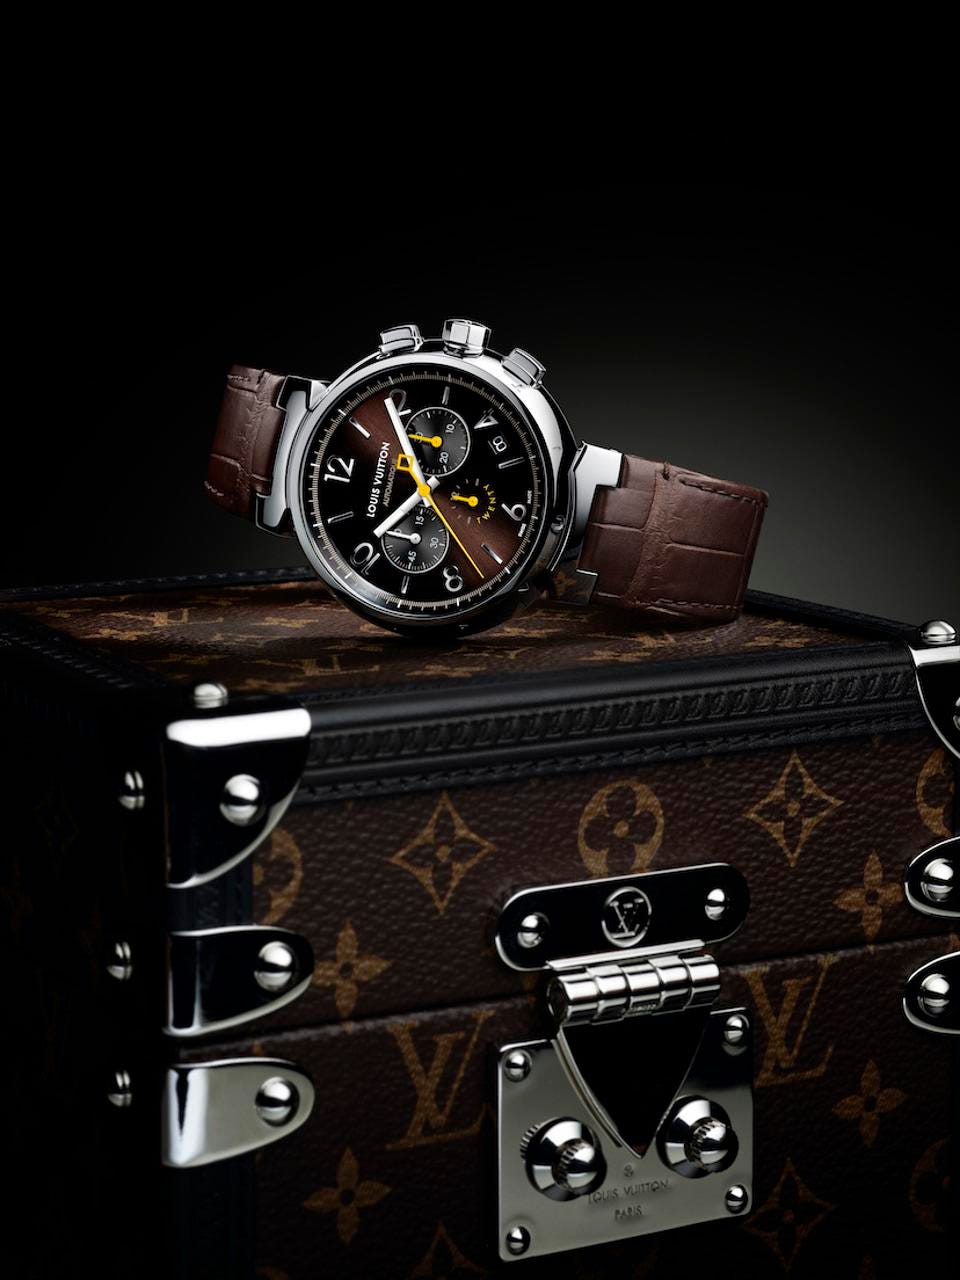 Louis Vuitton's Tambour has long marched to the beat of its own drum